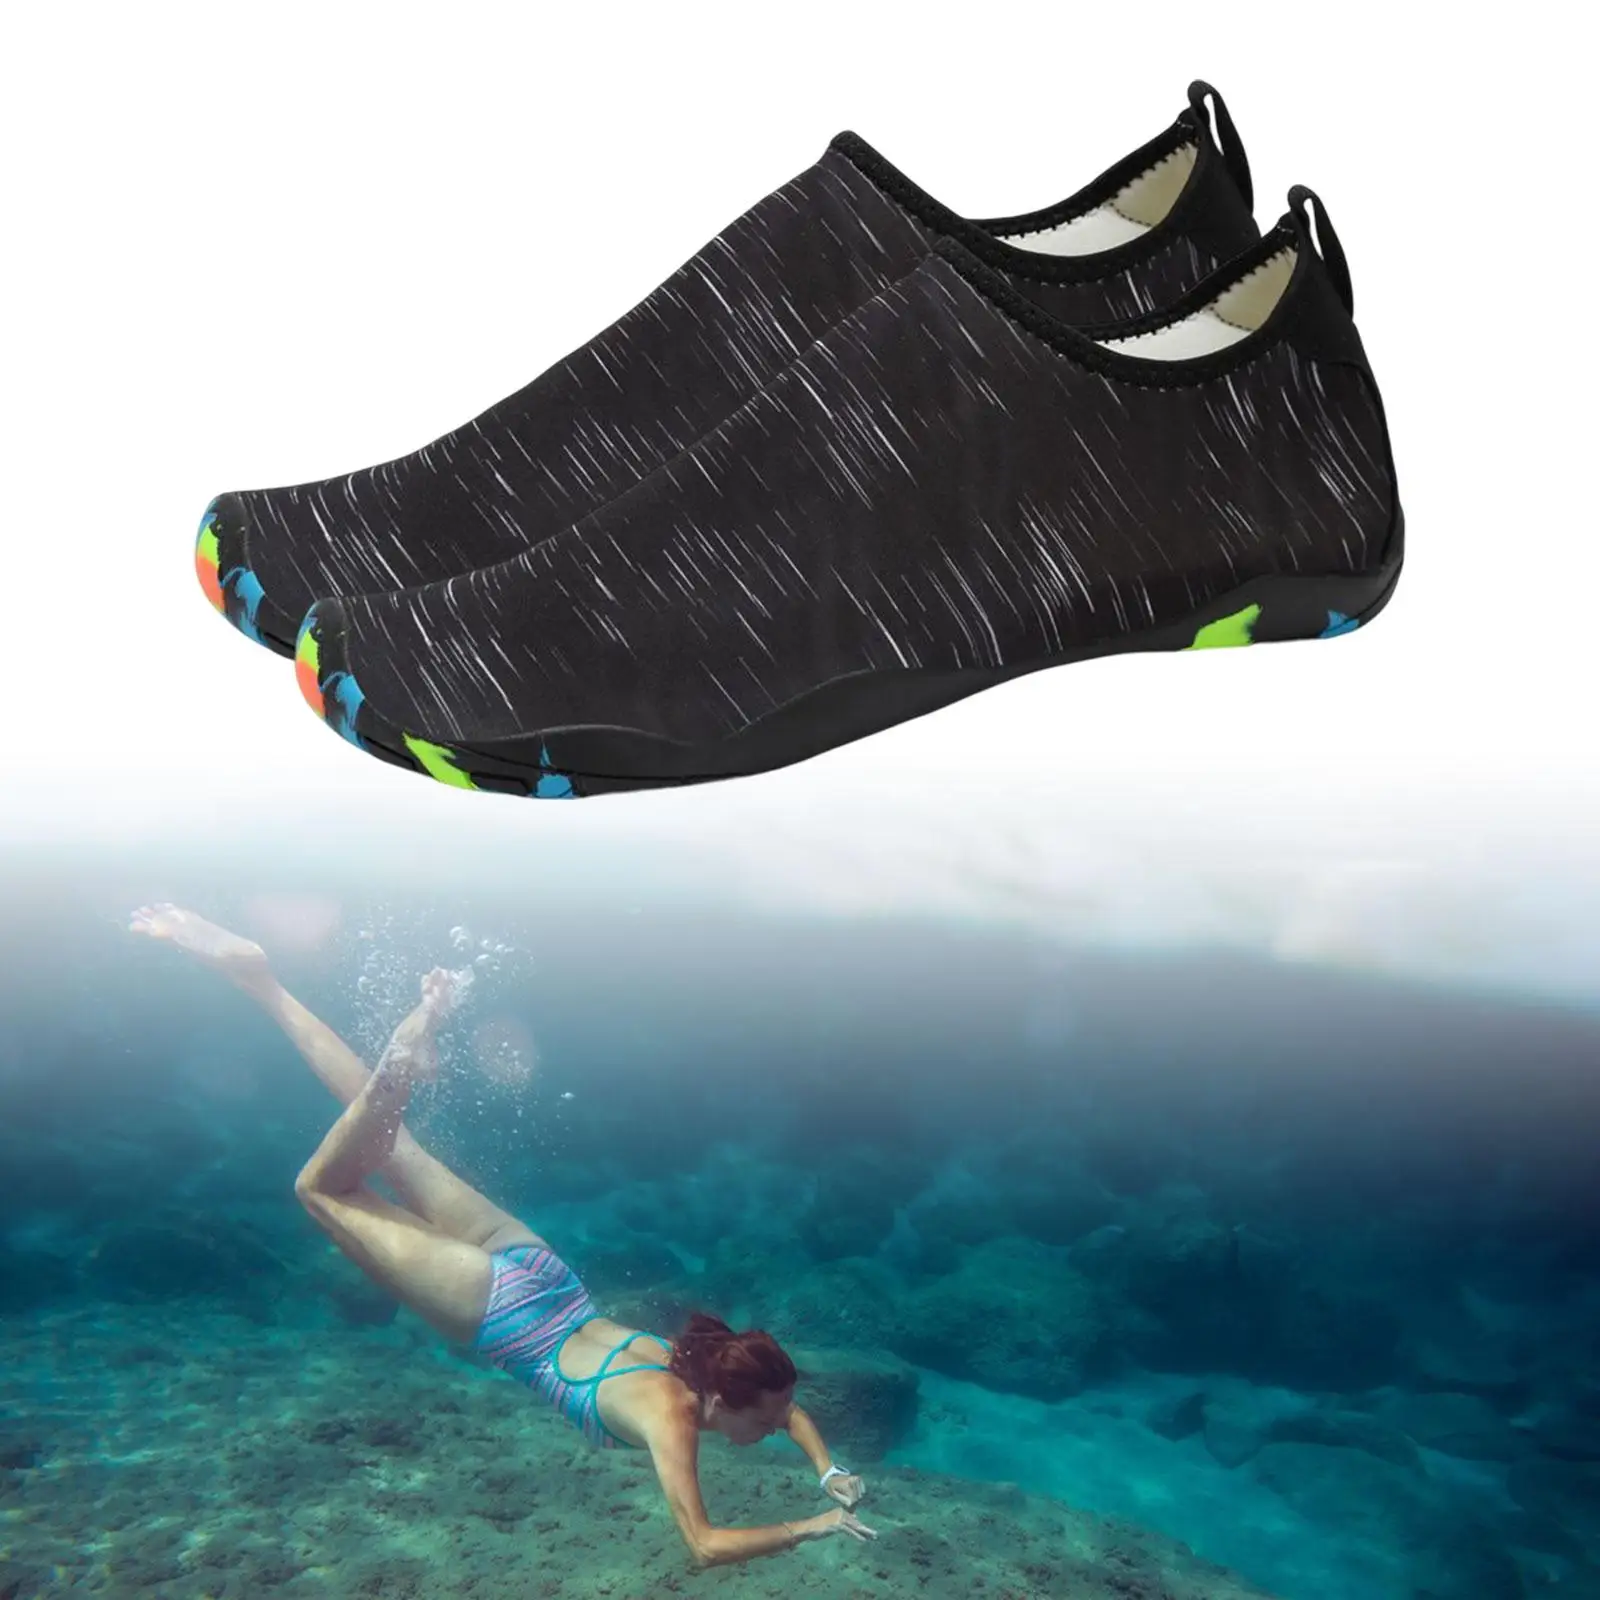 Shoes Quick Dry Beach Wear Barefoot Yoga Socks Men Women Water Shoes for Walking on Sand Beach Swim Exercise Boating